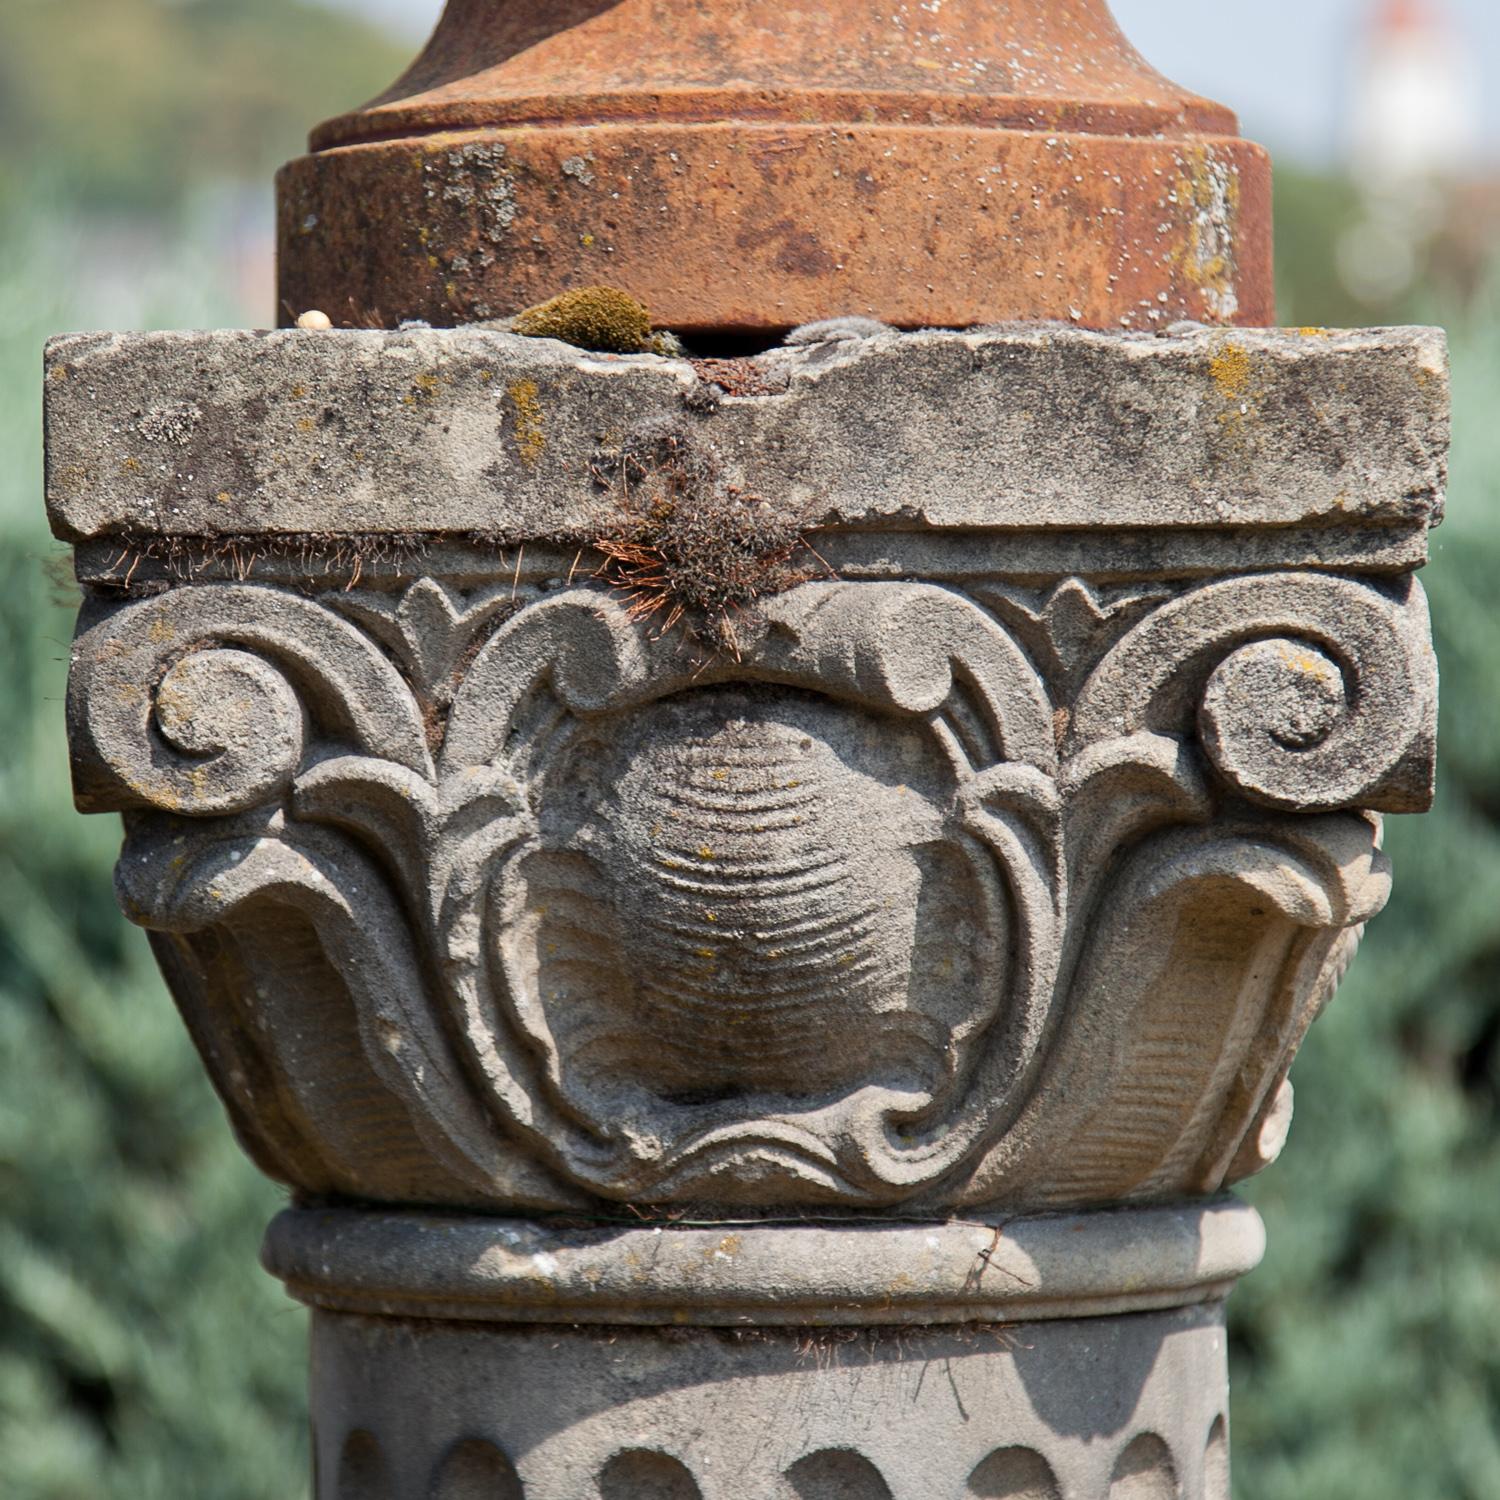 Pair of sandstone columns with fluted shafts and capitals decorated with volutes. Very beautiful natural patina.